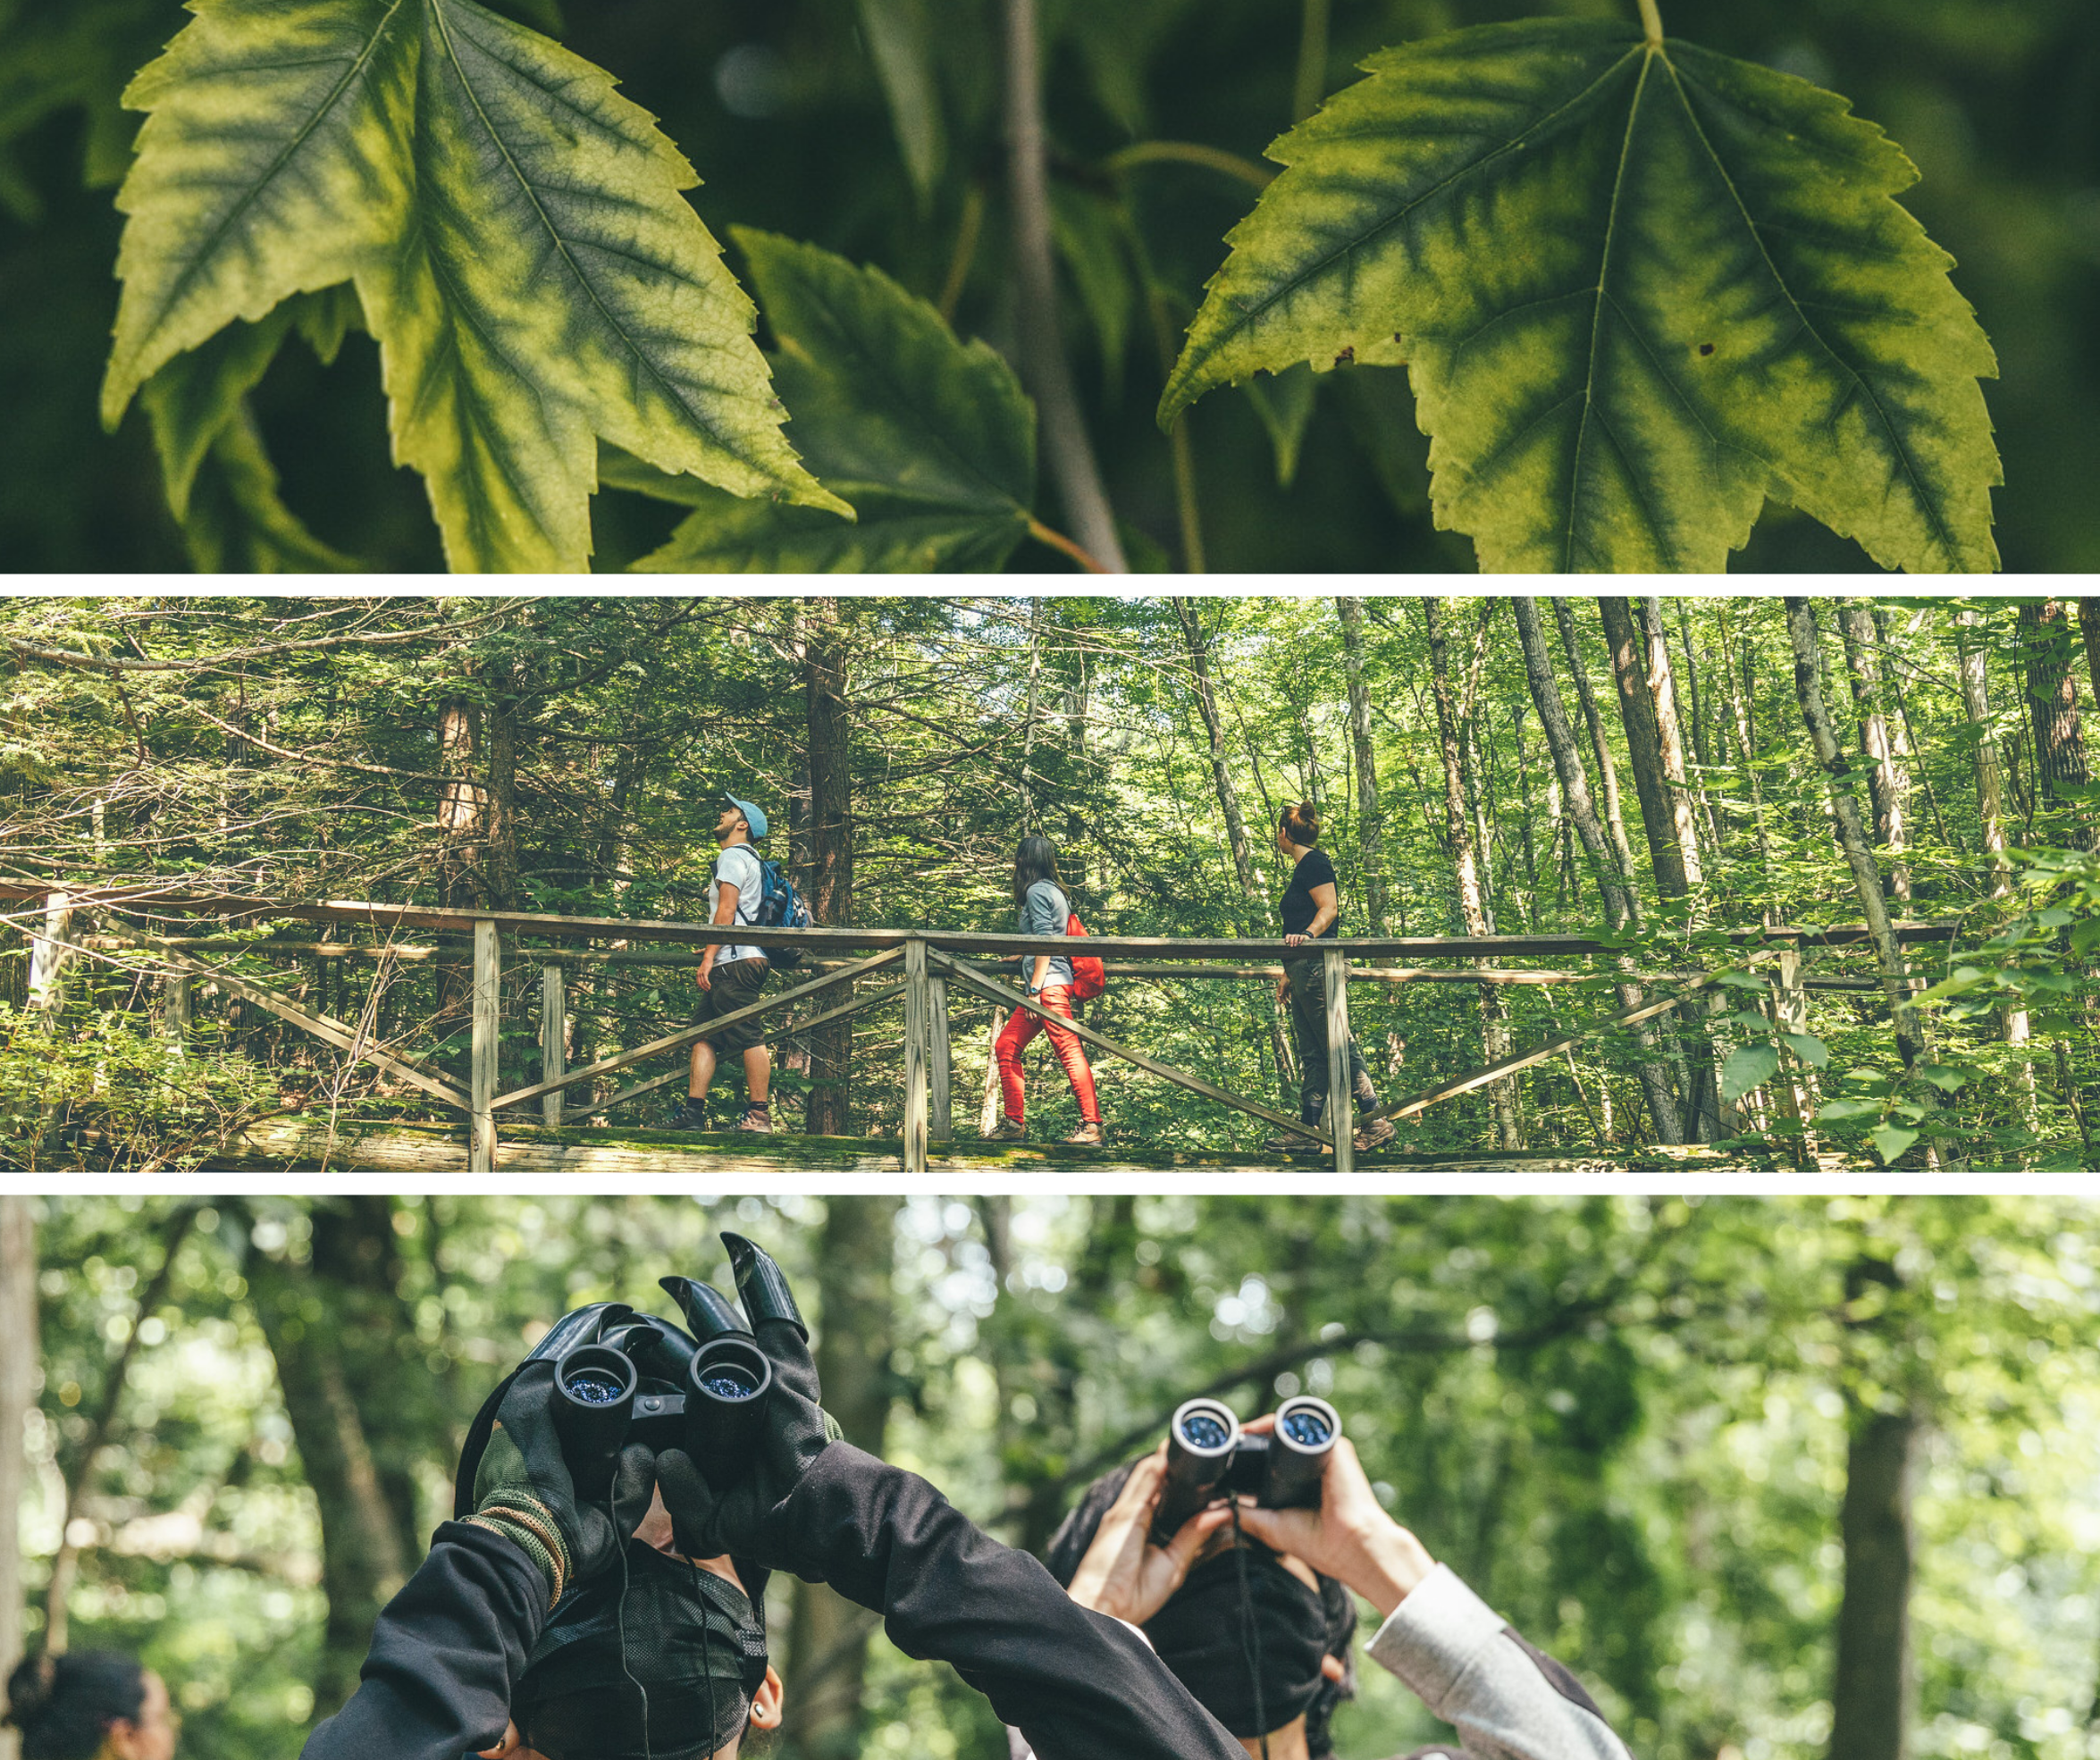 Three horizontally oriented photos showing a macro image of tree leaves, three people walking across a forest bridge, and two people looking through binoculars in a forest